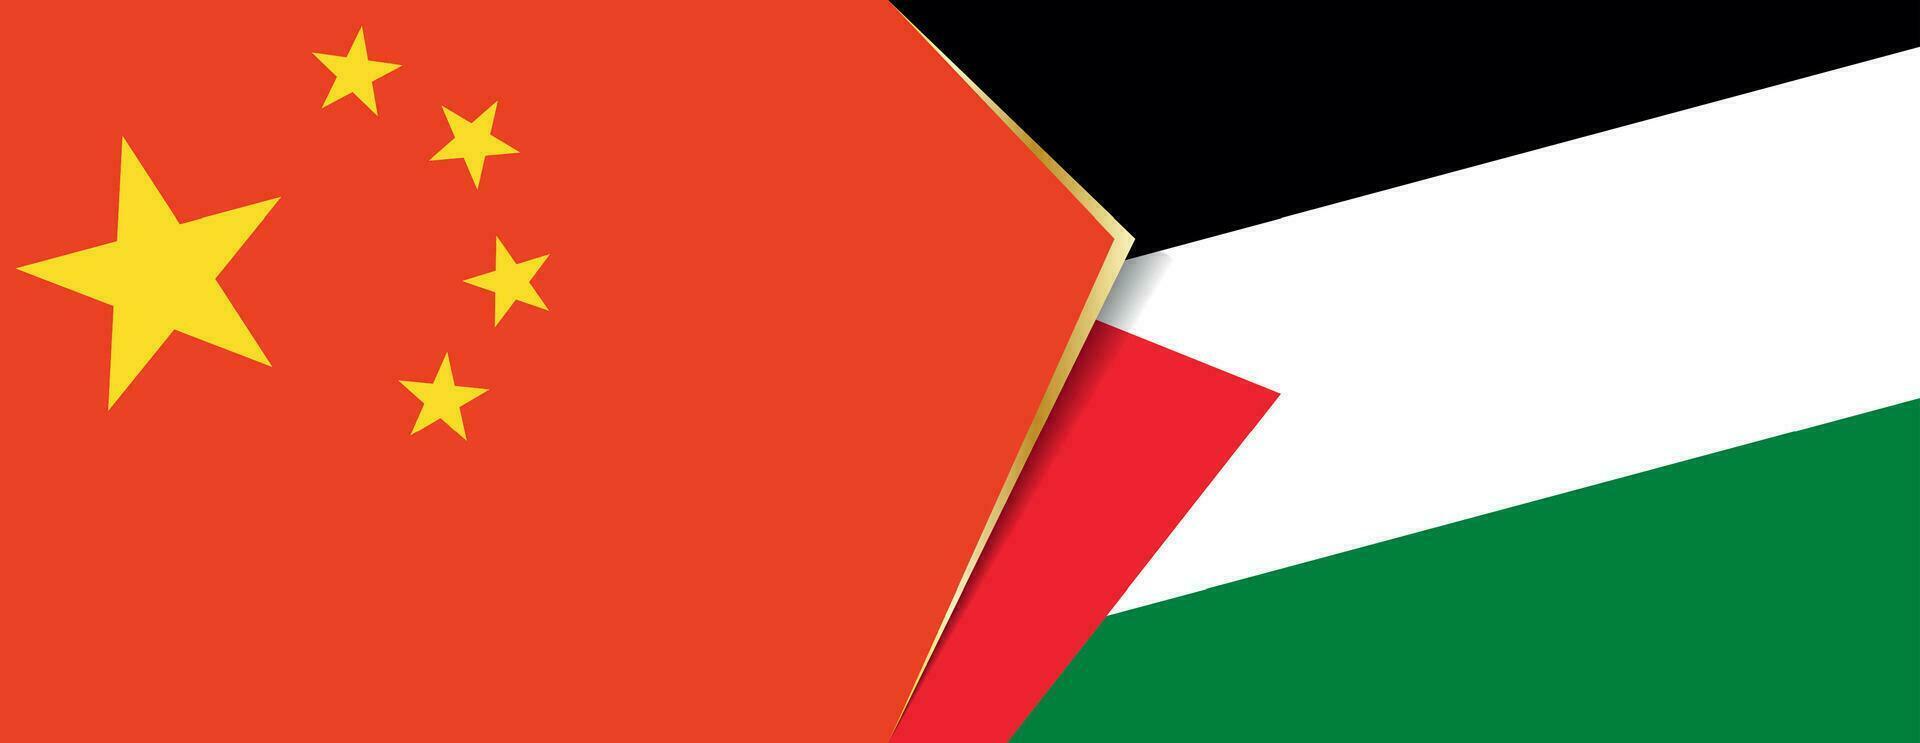 China and Palestine flags, two vector flags.